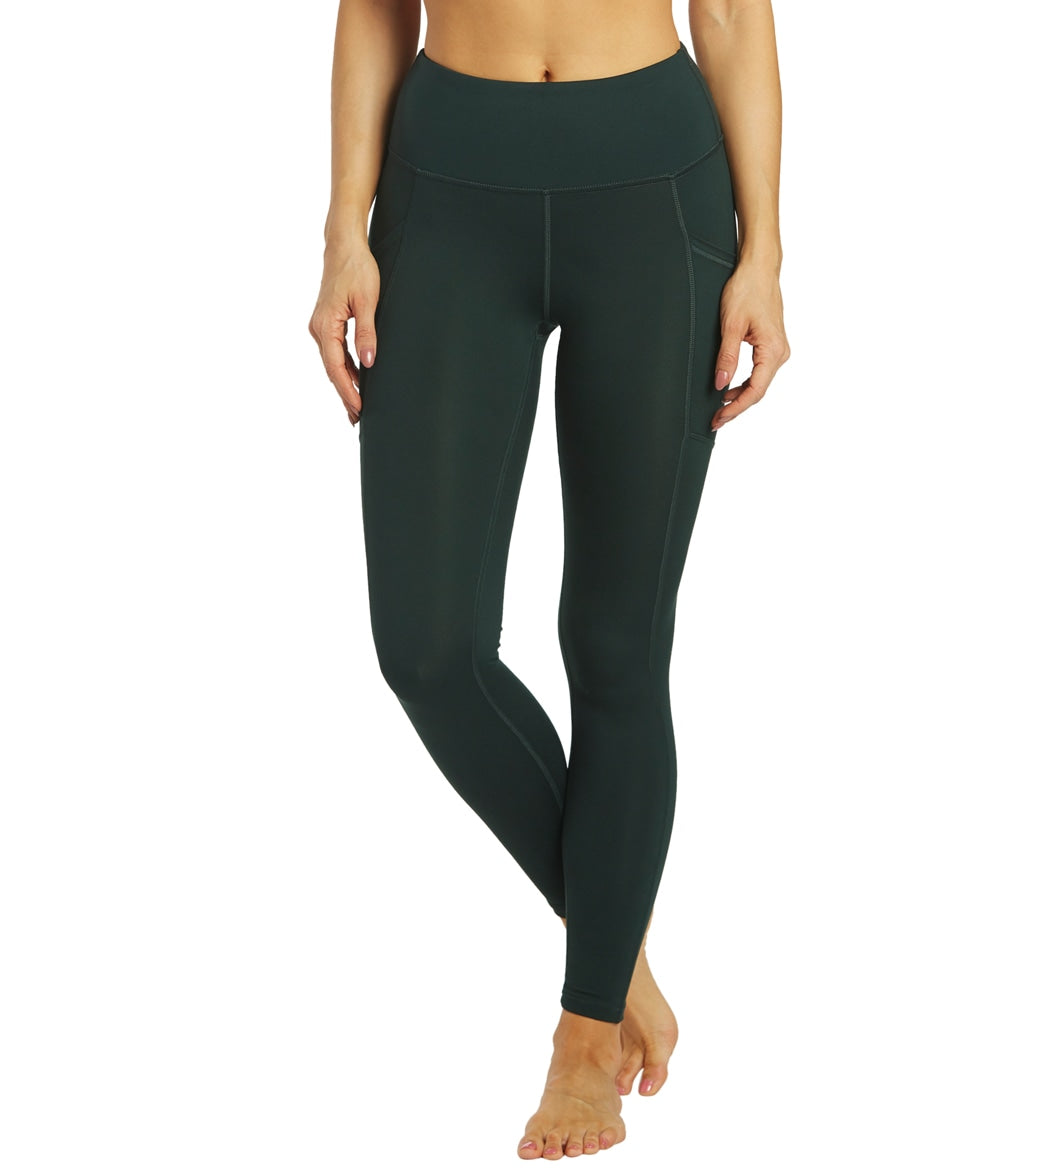 High Waist Balance Collection Yoga Pants For Women And Girls Solid Color  Fitness Athletic Leggings For Running And Workouts Size 32 U4DR#5458062  From Jkcz, $18.34